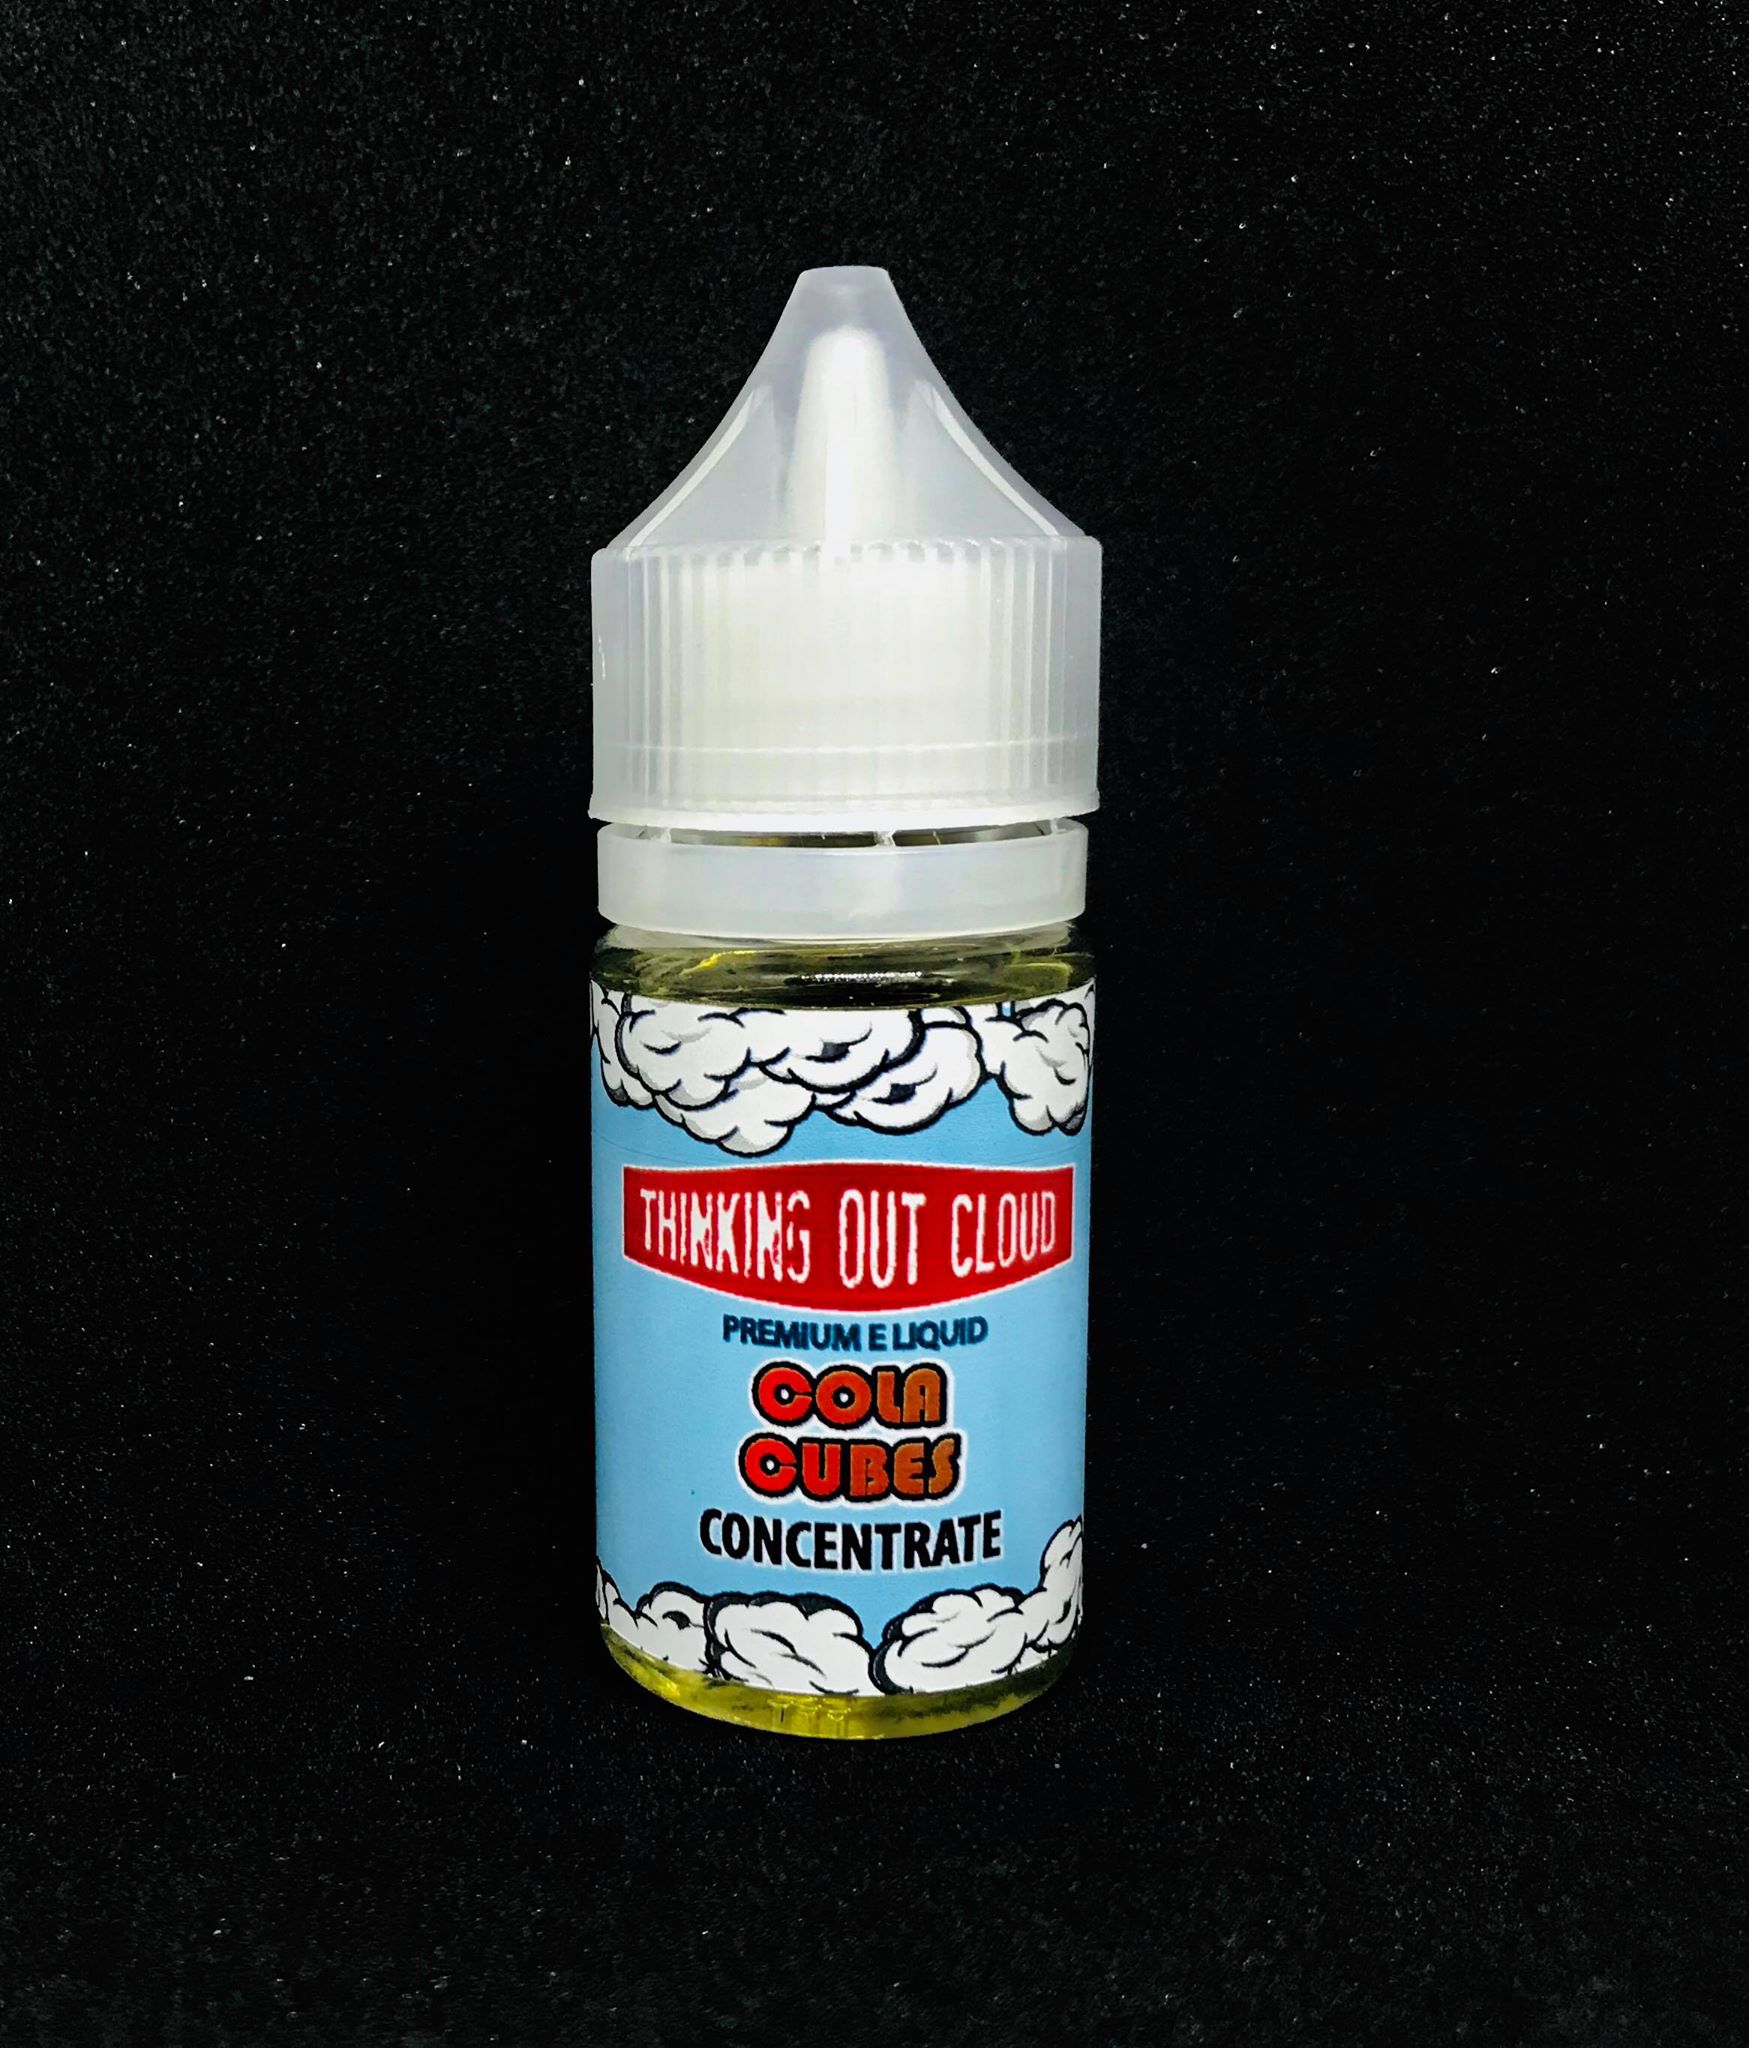 Cola Cubes Flavour Concentrate by Thinking Out Cloud